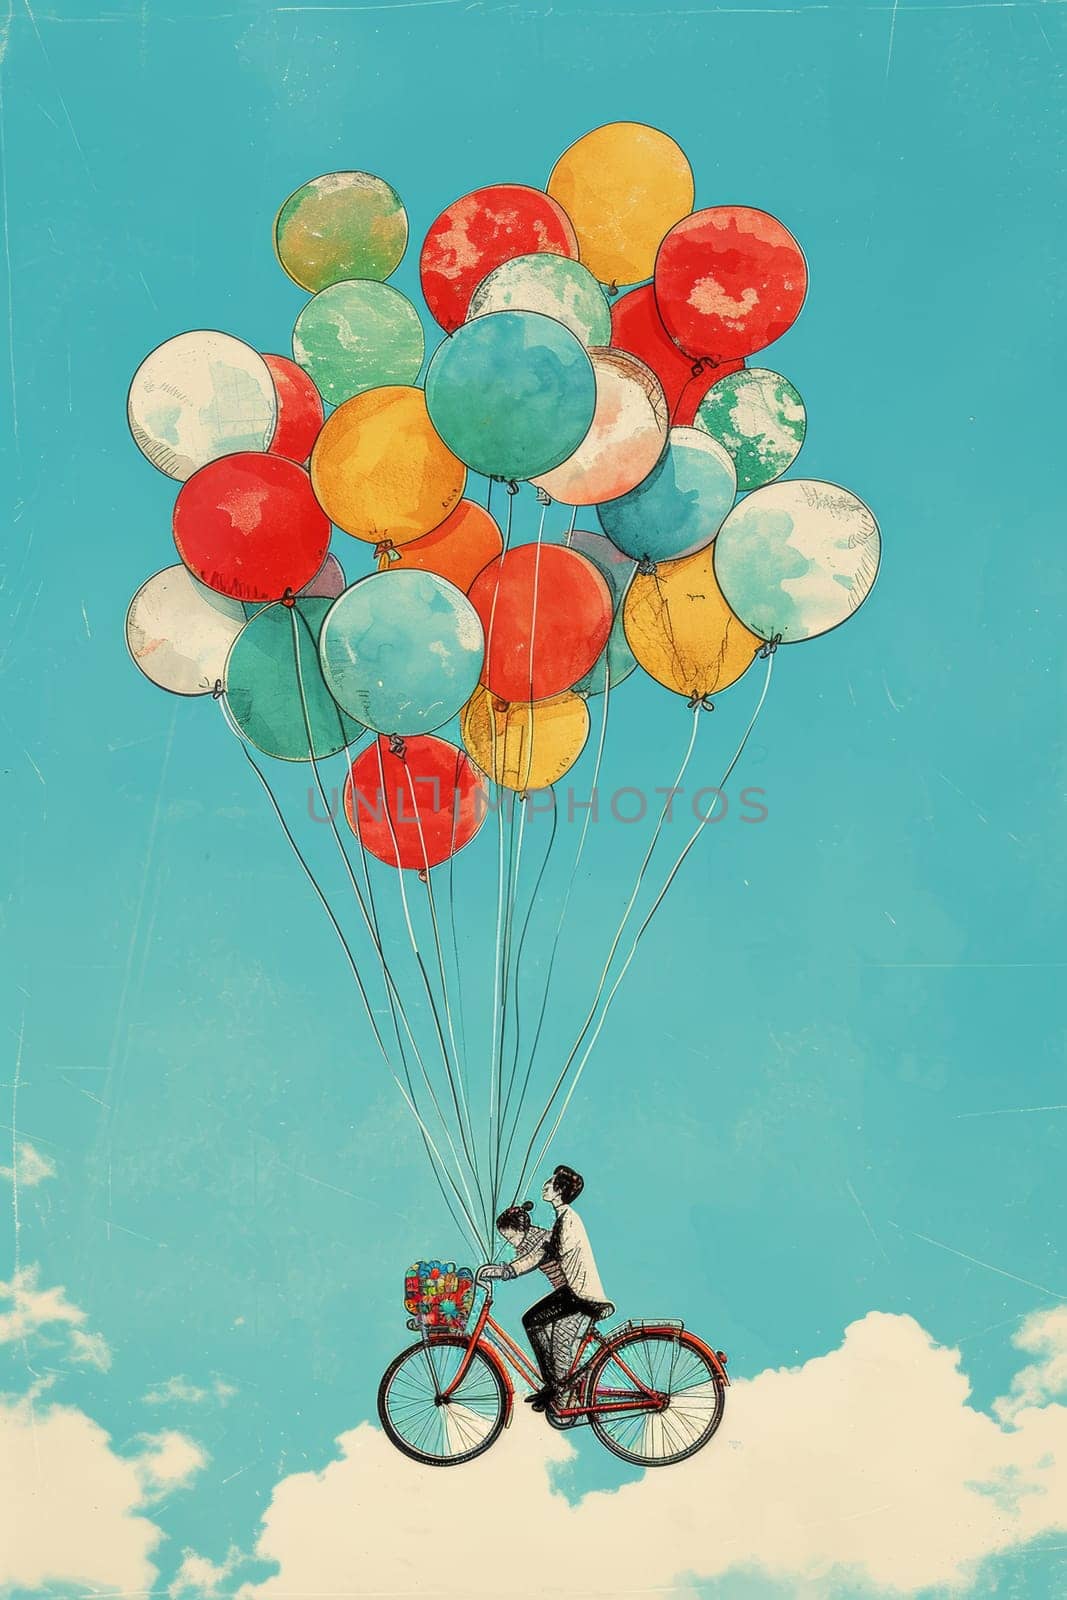 Couple on a bicycle lifted by colorful balloons, evoking whimsy and adventure in a watercolor scene